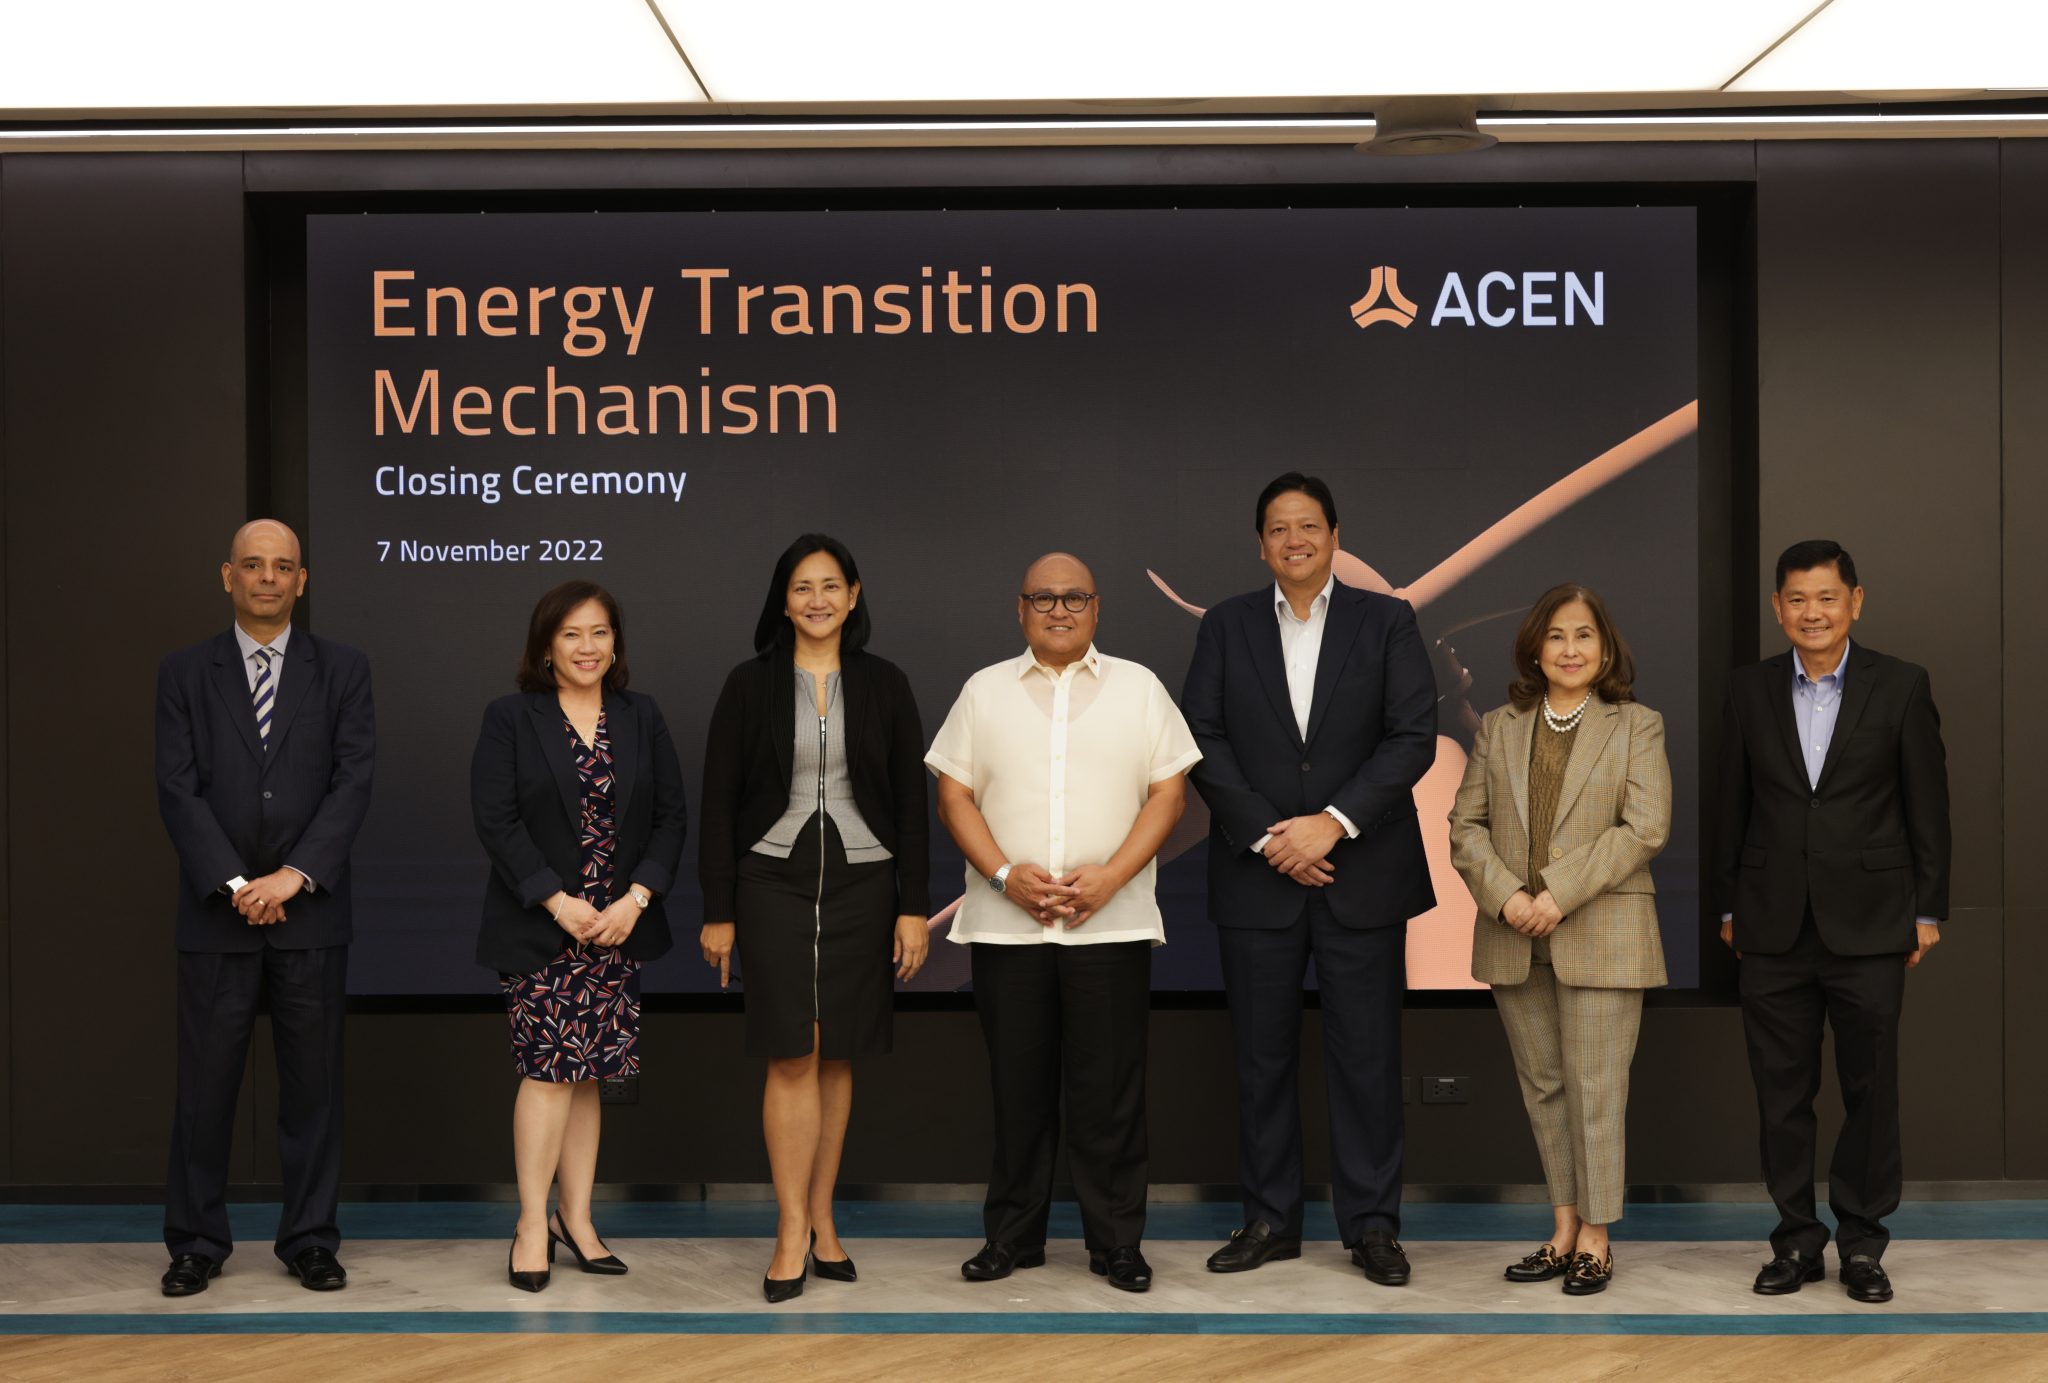 ACEN completes the world’s first Energy Transition Mechanism